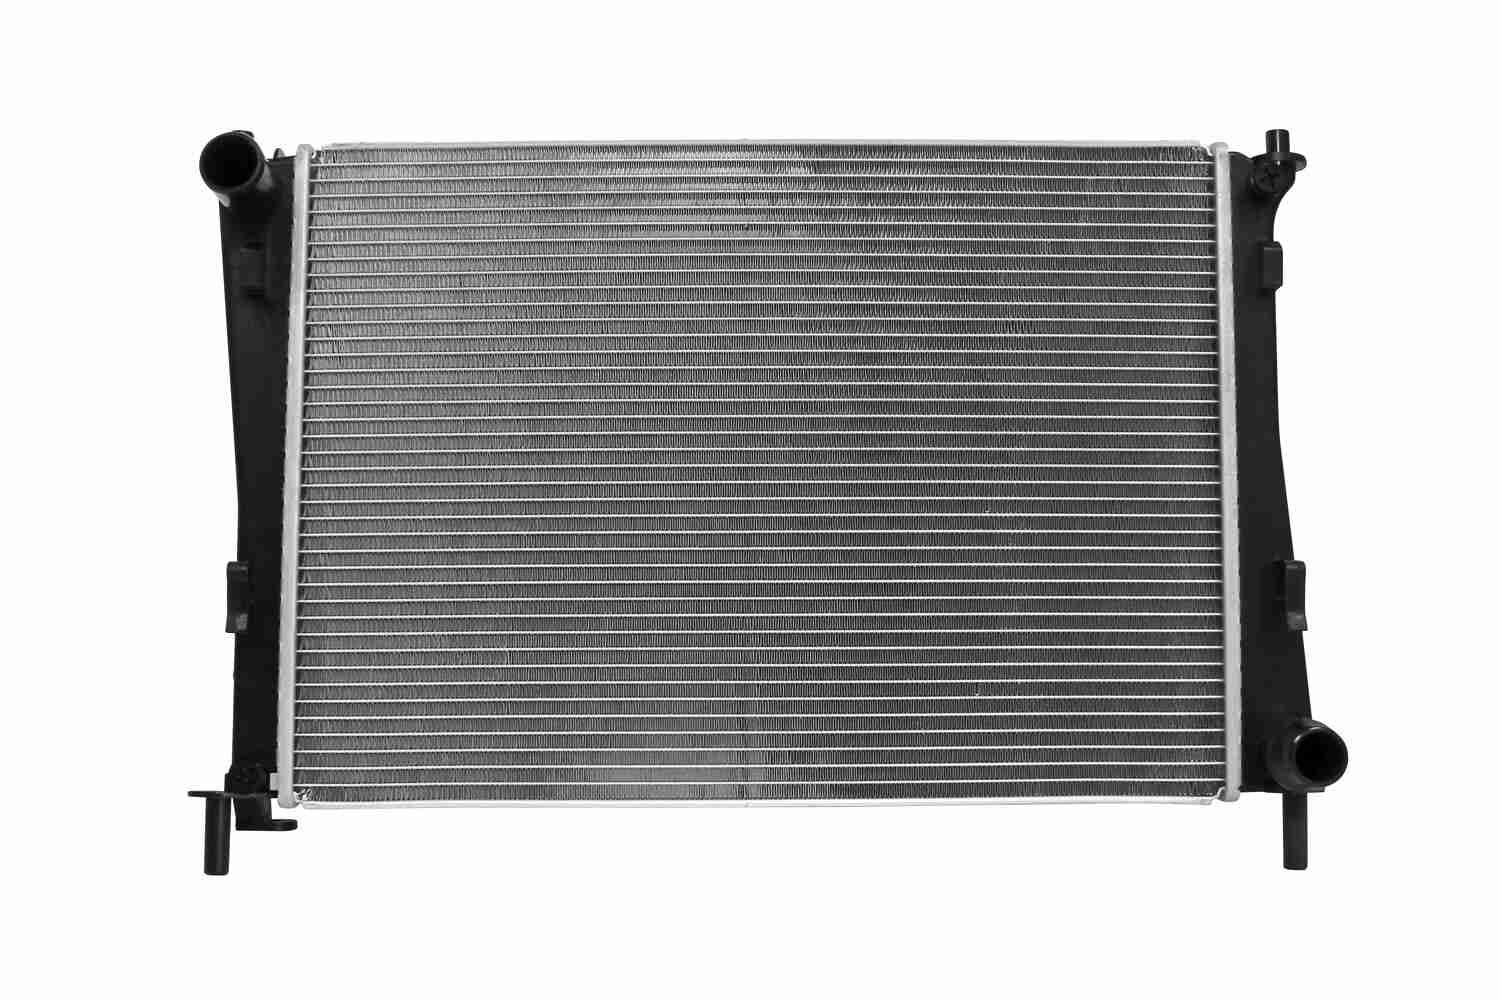 VEMO V25-60-0018 Engine radiator for vehicles with/without air conditioning, 500 x 358 x 16 mm, Original VEMO Quality, Manual Transmission